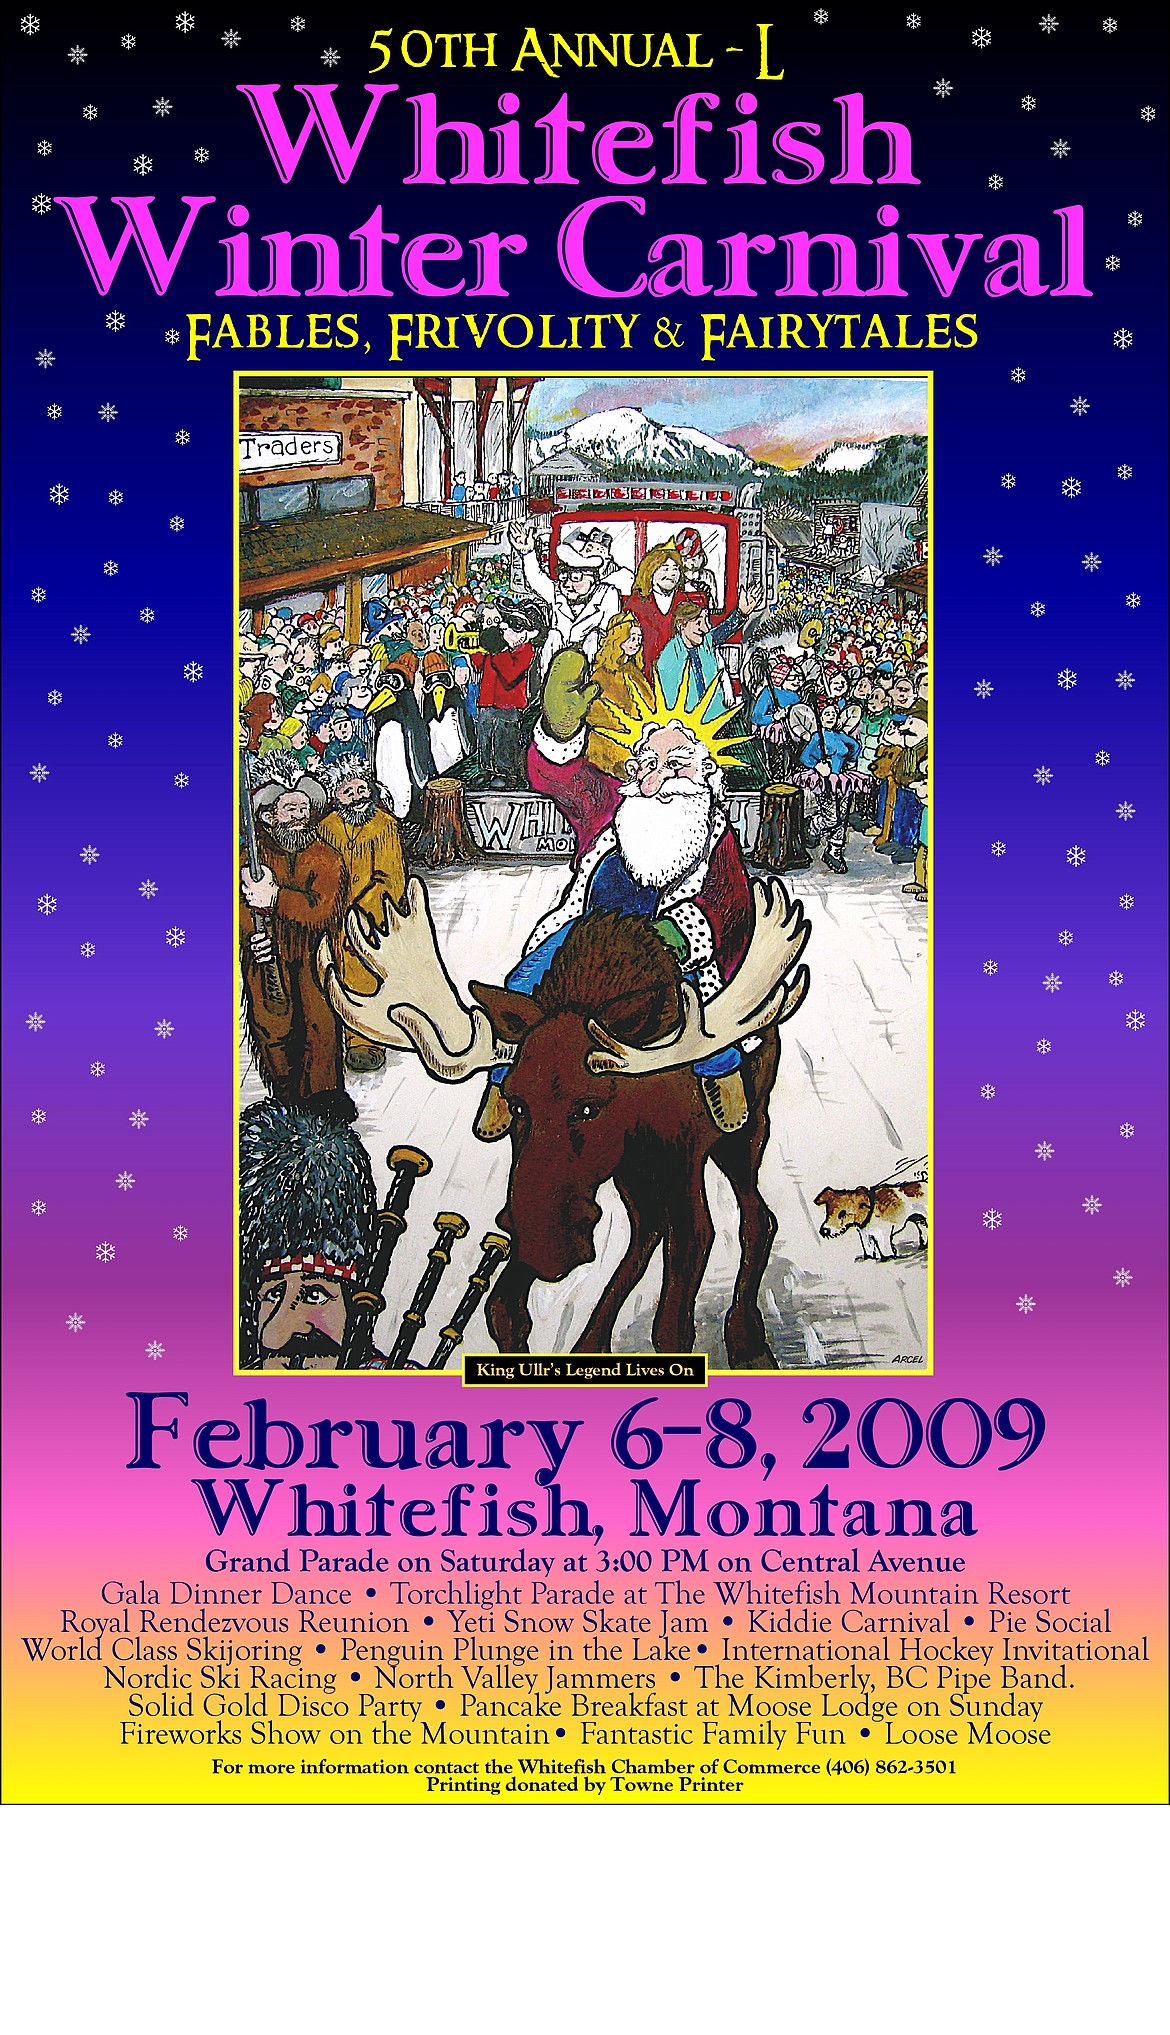 The 50th annual Whitefish Winter Carnival poster featuring original art by Jeff Arcel.
Arcel was the main artist and designer for the carnival's posters from 2005 to 2019.